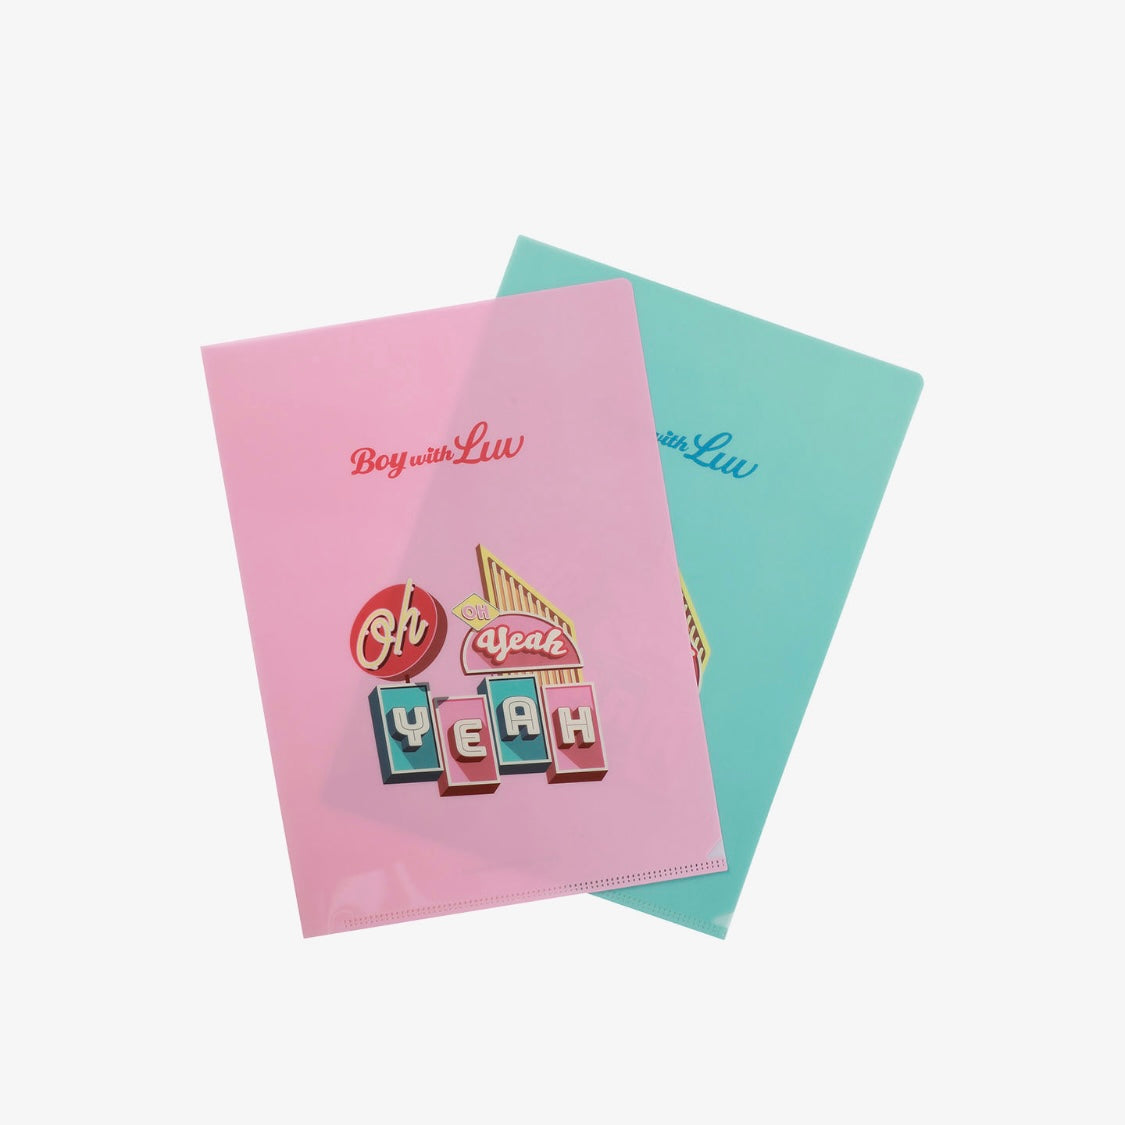 BTS] Pop-Up : Space Of BTS : Boy With Luv – krmerch